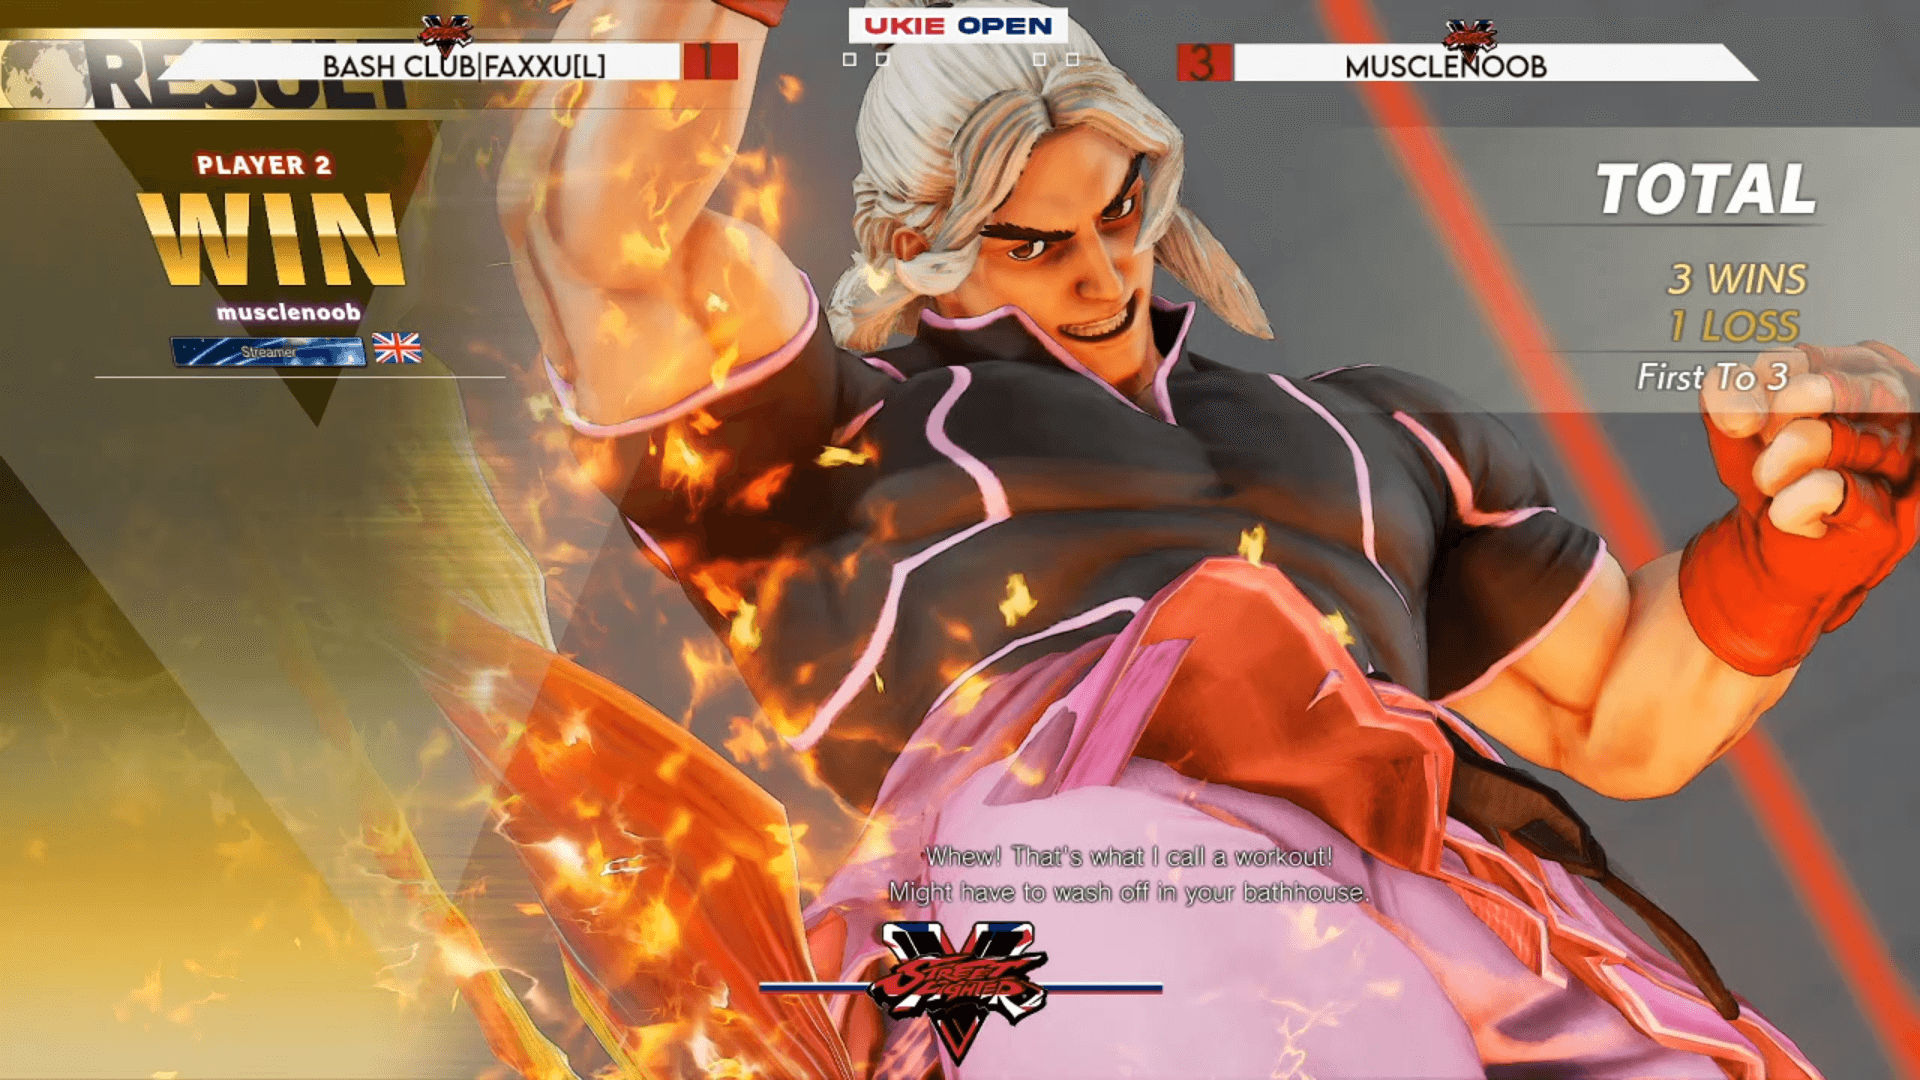 UKIE Discord Open - an SF5 Tournament for UK/IE-Based Players